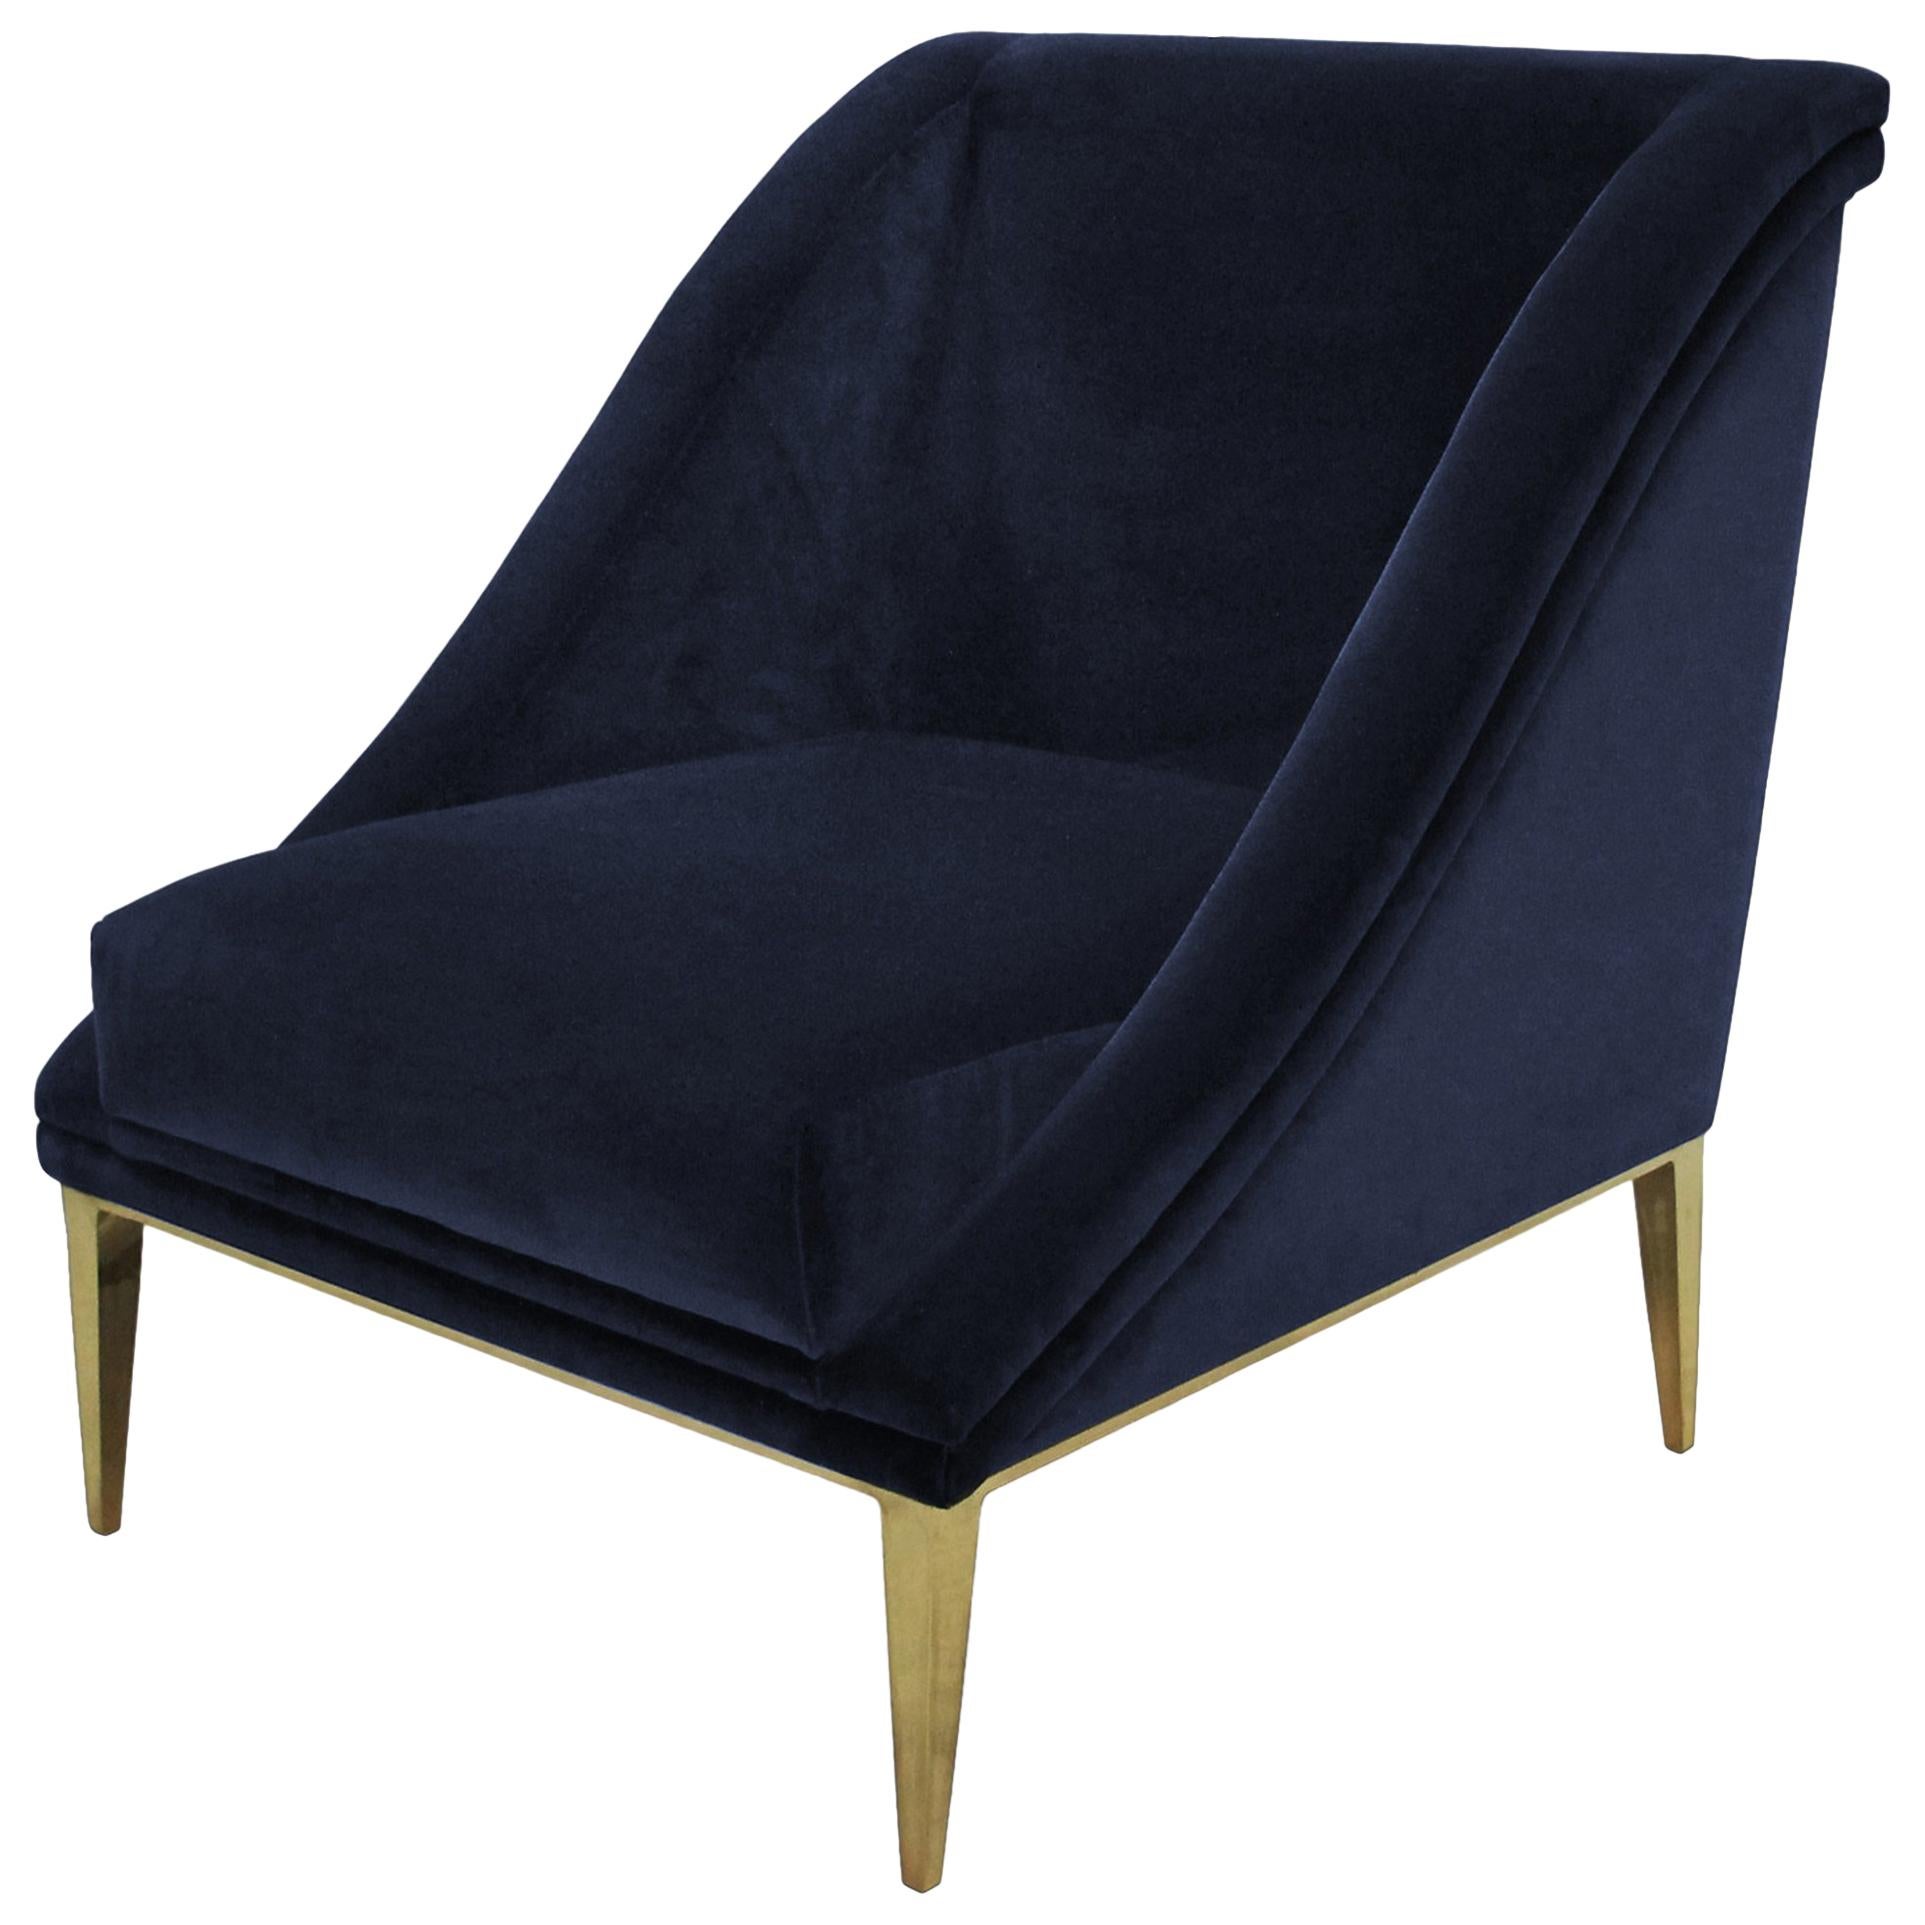 Designed to perform in a matter that indulges the eyes, the Geisha ‘s curves grace a room with the extravagance and poise of a Kyoto Geisha. This fully upholstered tight back chair is wrapped with a chic metal band leading to modern and sleek metal